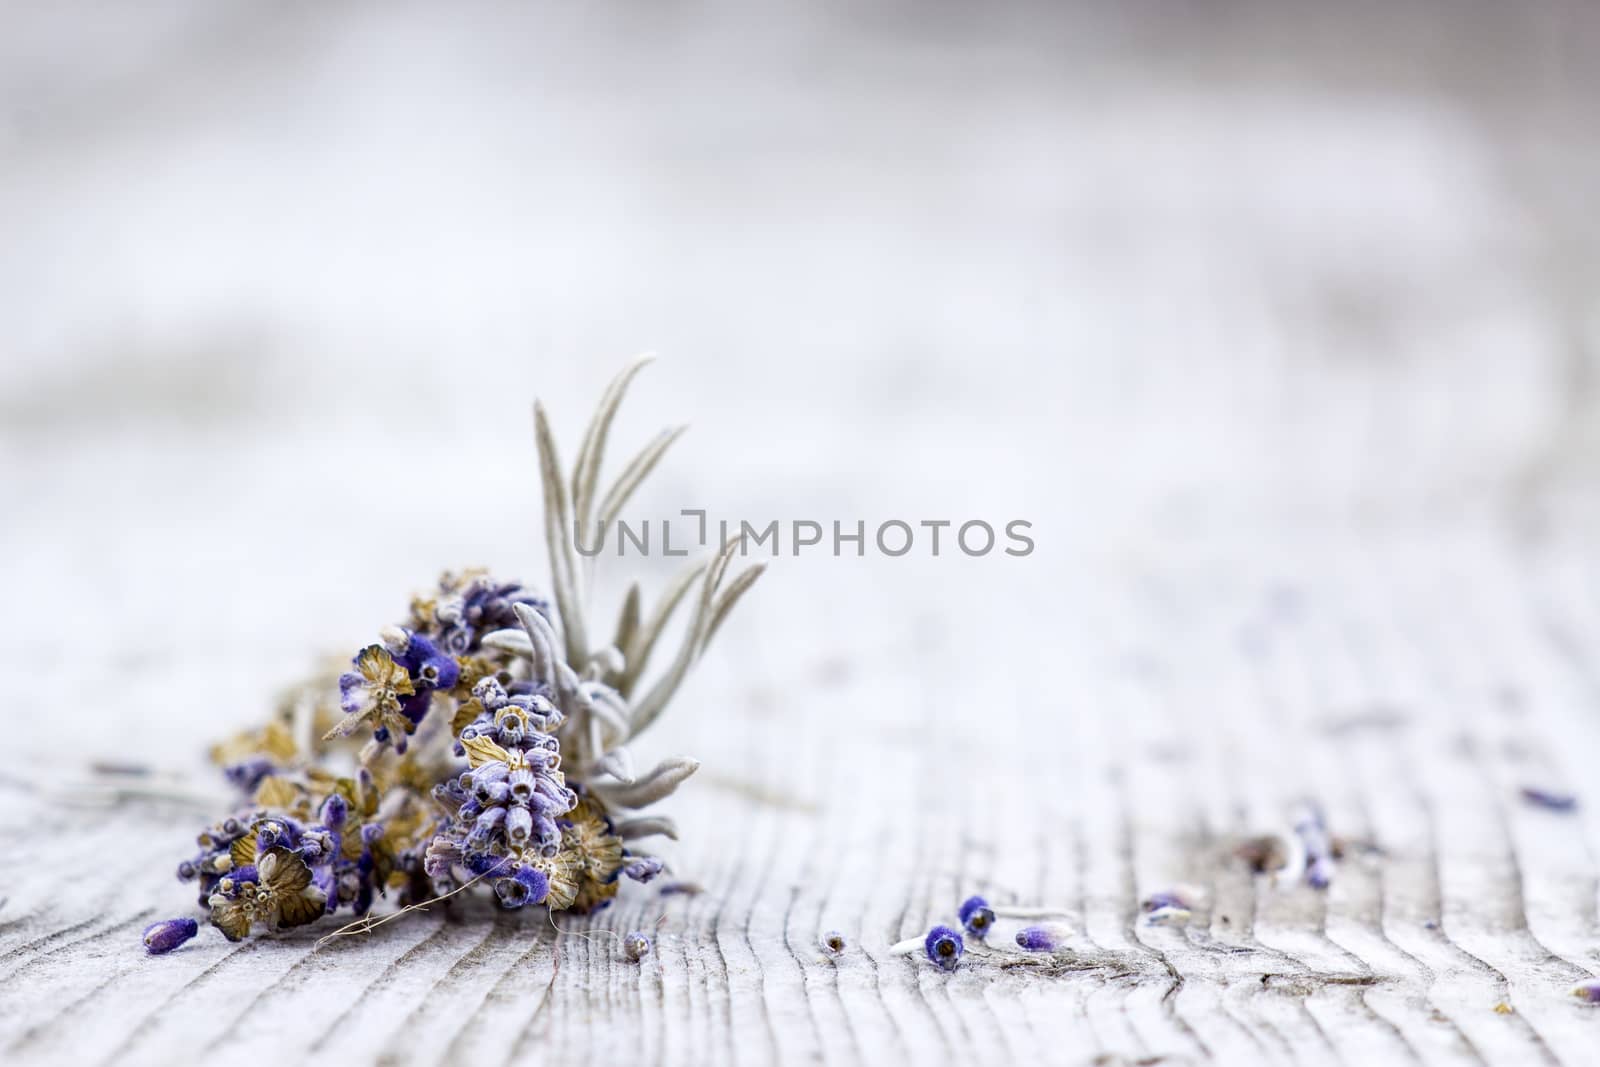 Bunch of dried lavender on old wooden background by miradrozdowski